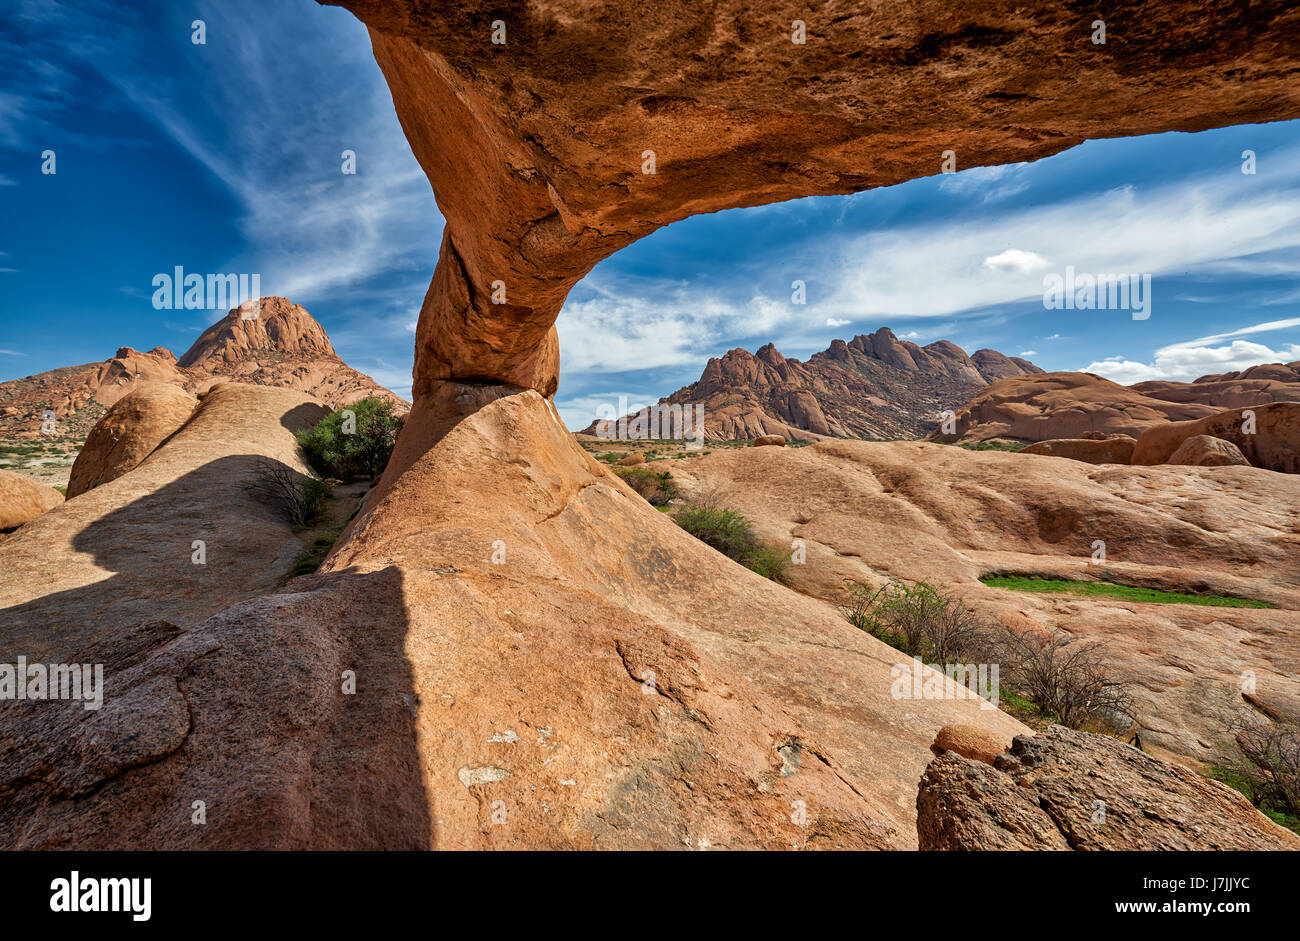 The Arch at Spitzkoppe, mountain landscape of granite rocks, Matterhorn of Namibia, Namibia, Africa Stock Photo